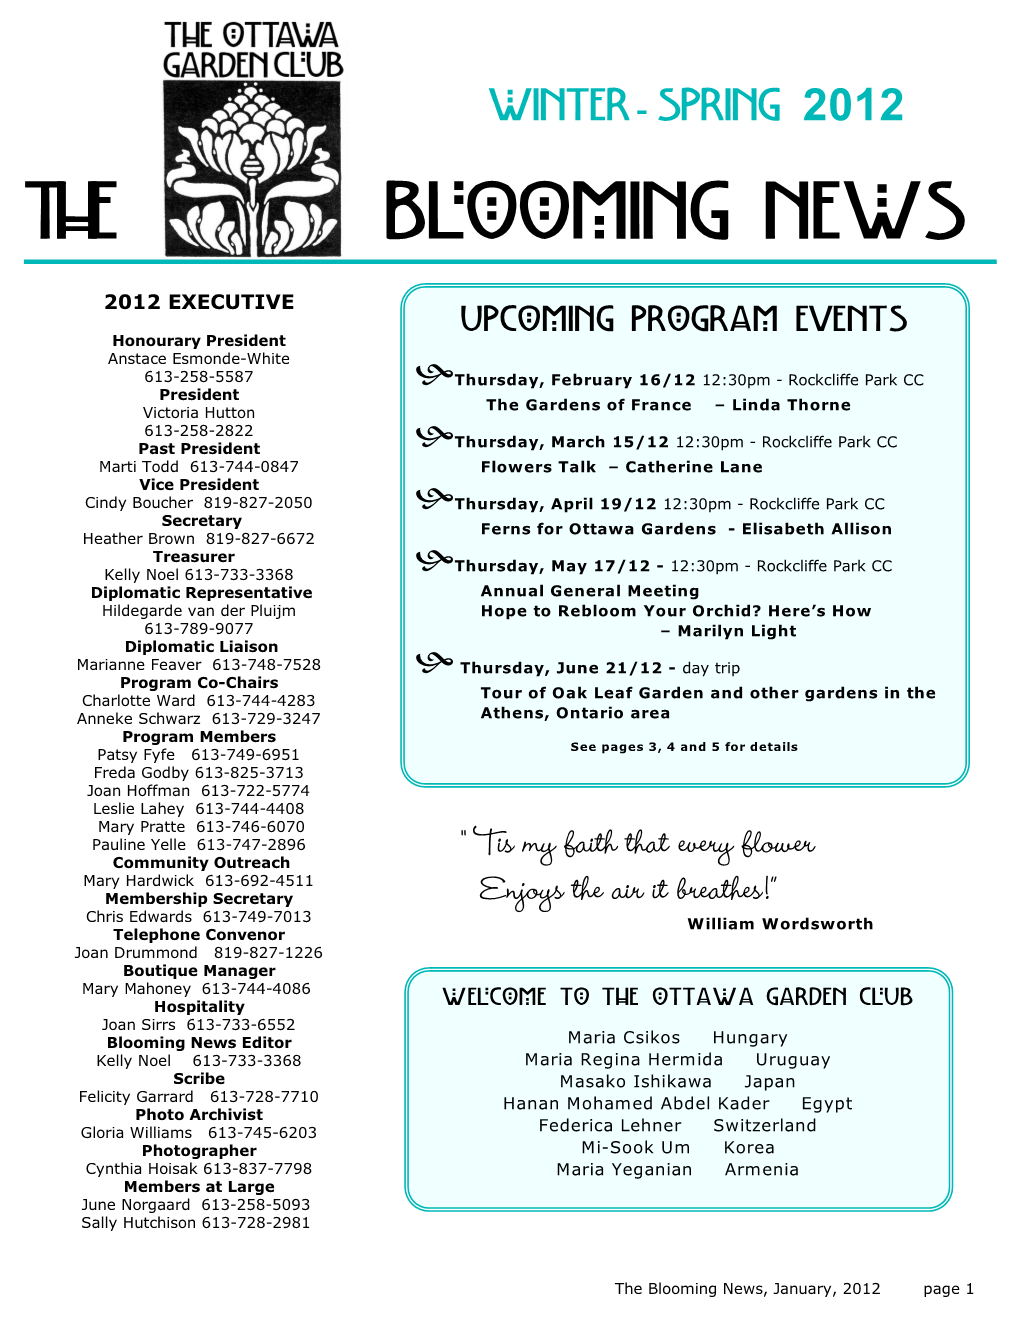 The Blooming News